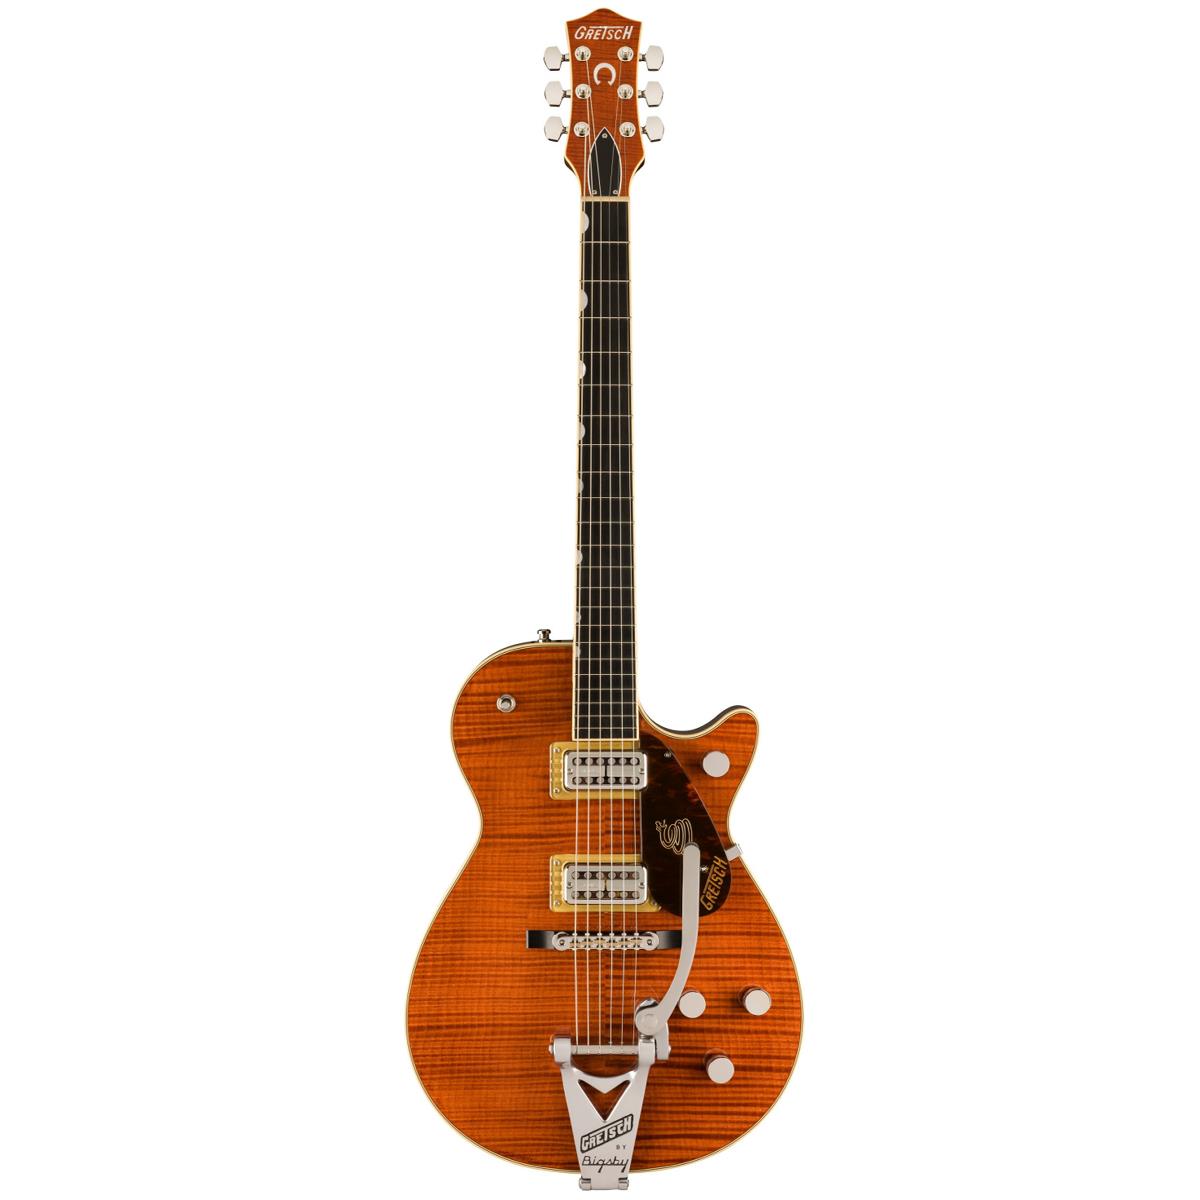 Image of Gretsch G6130T Limited Edition Sidewinder Electric Guitar